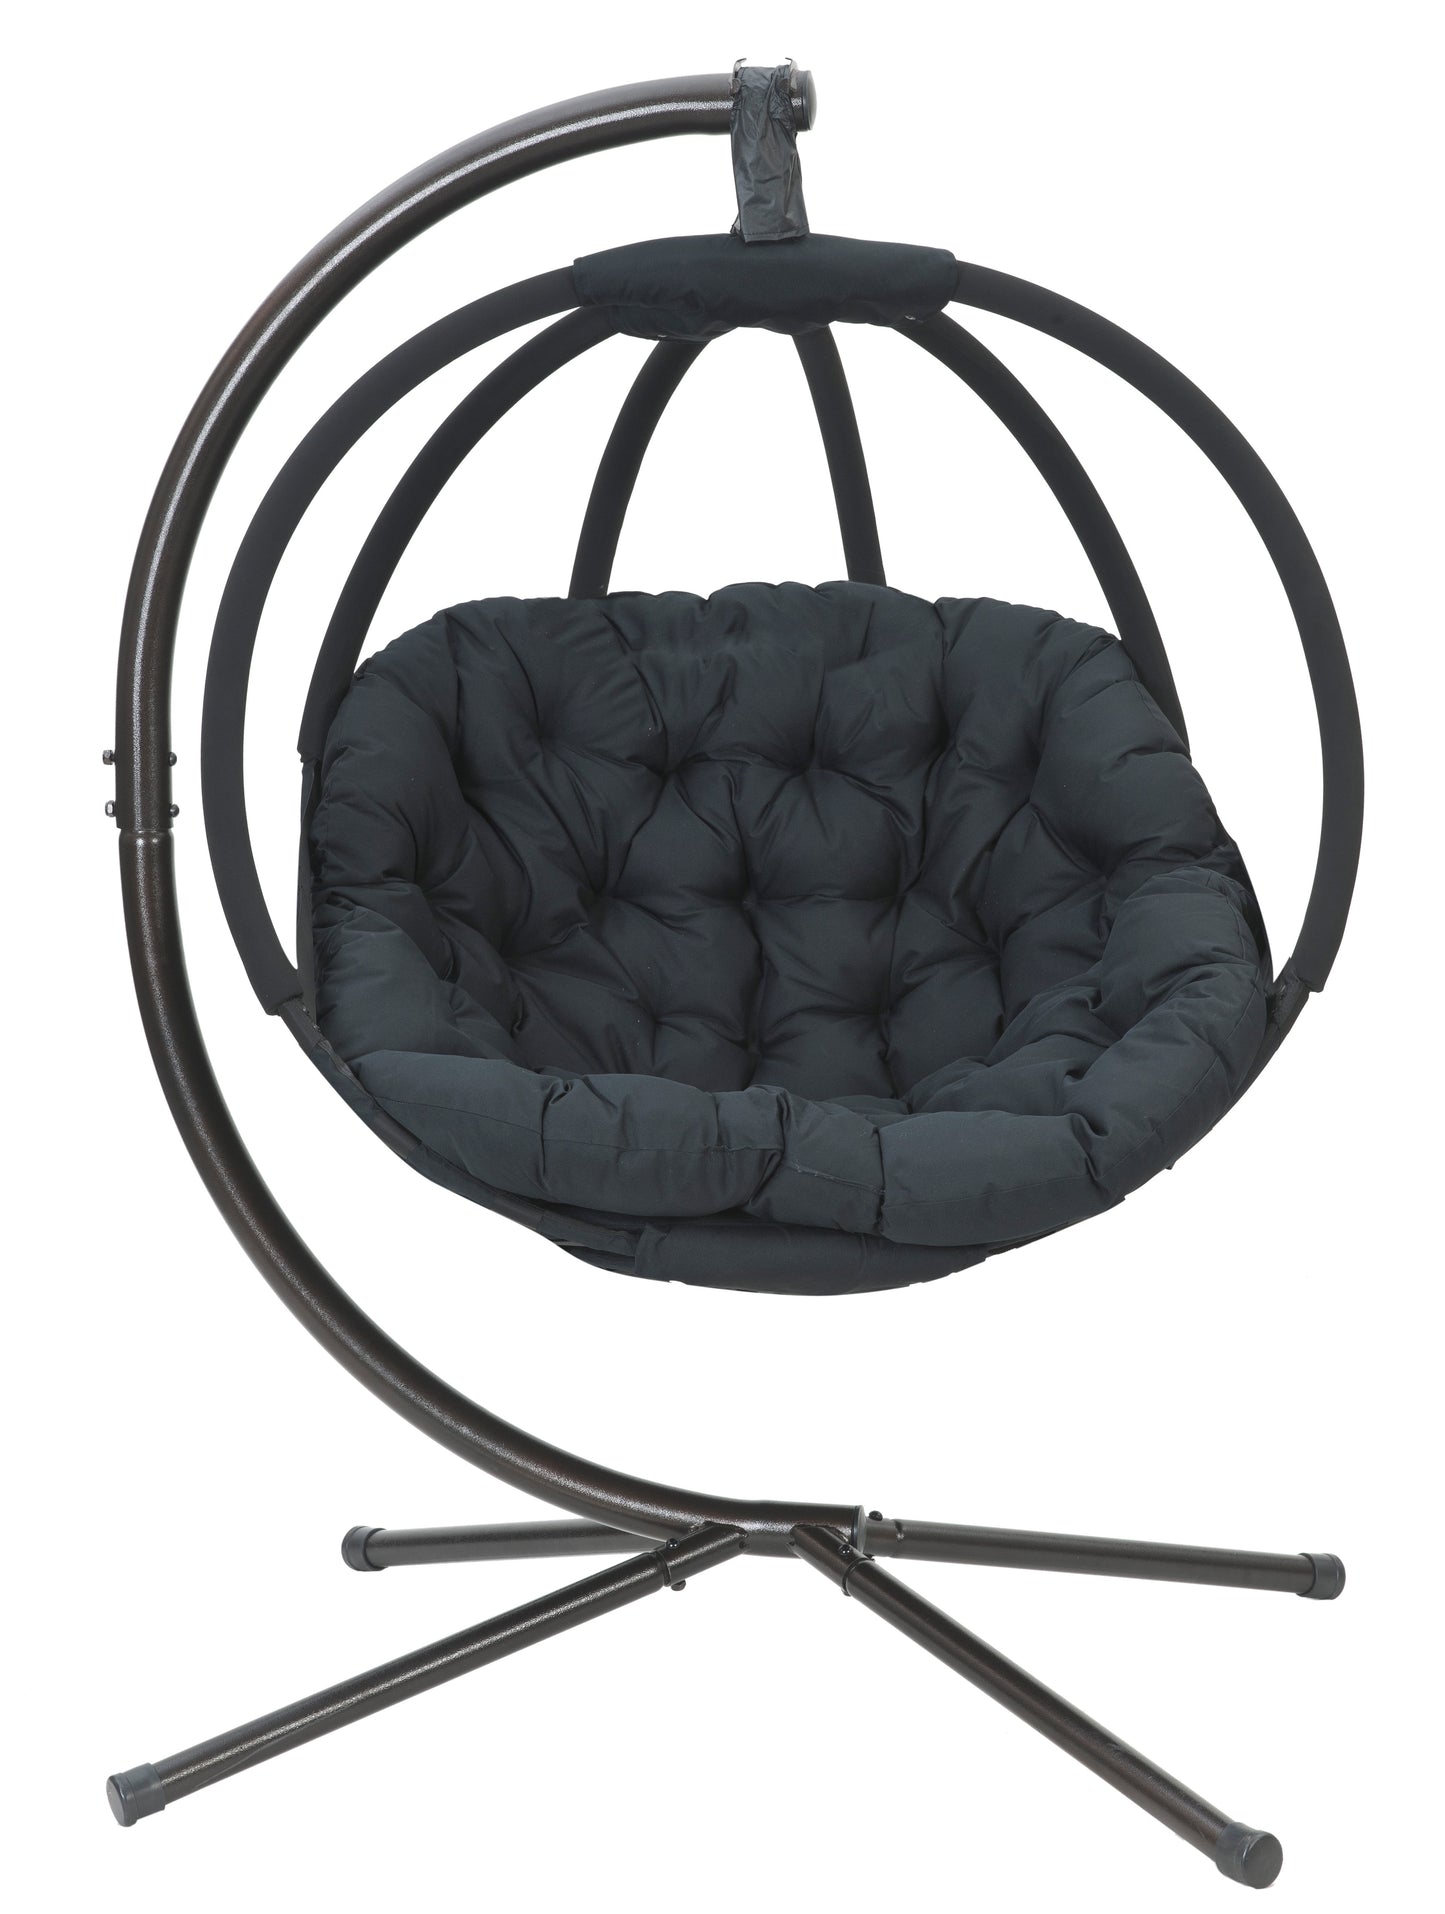 FlowerHouse Hanging Ball Chair with Stand - Overland - in black front view